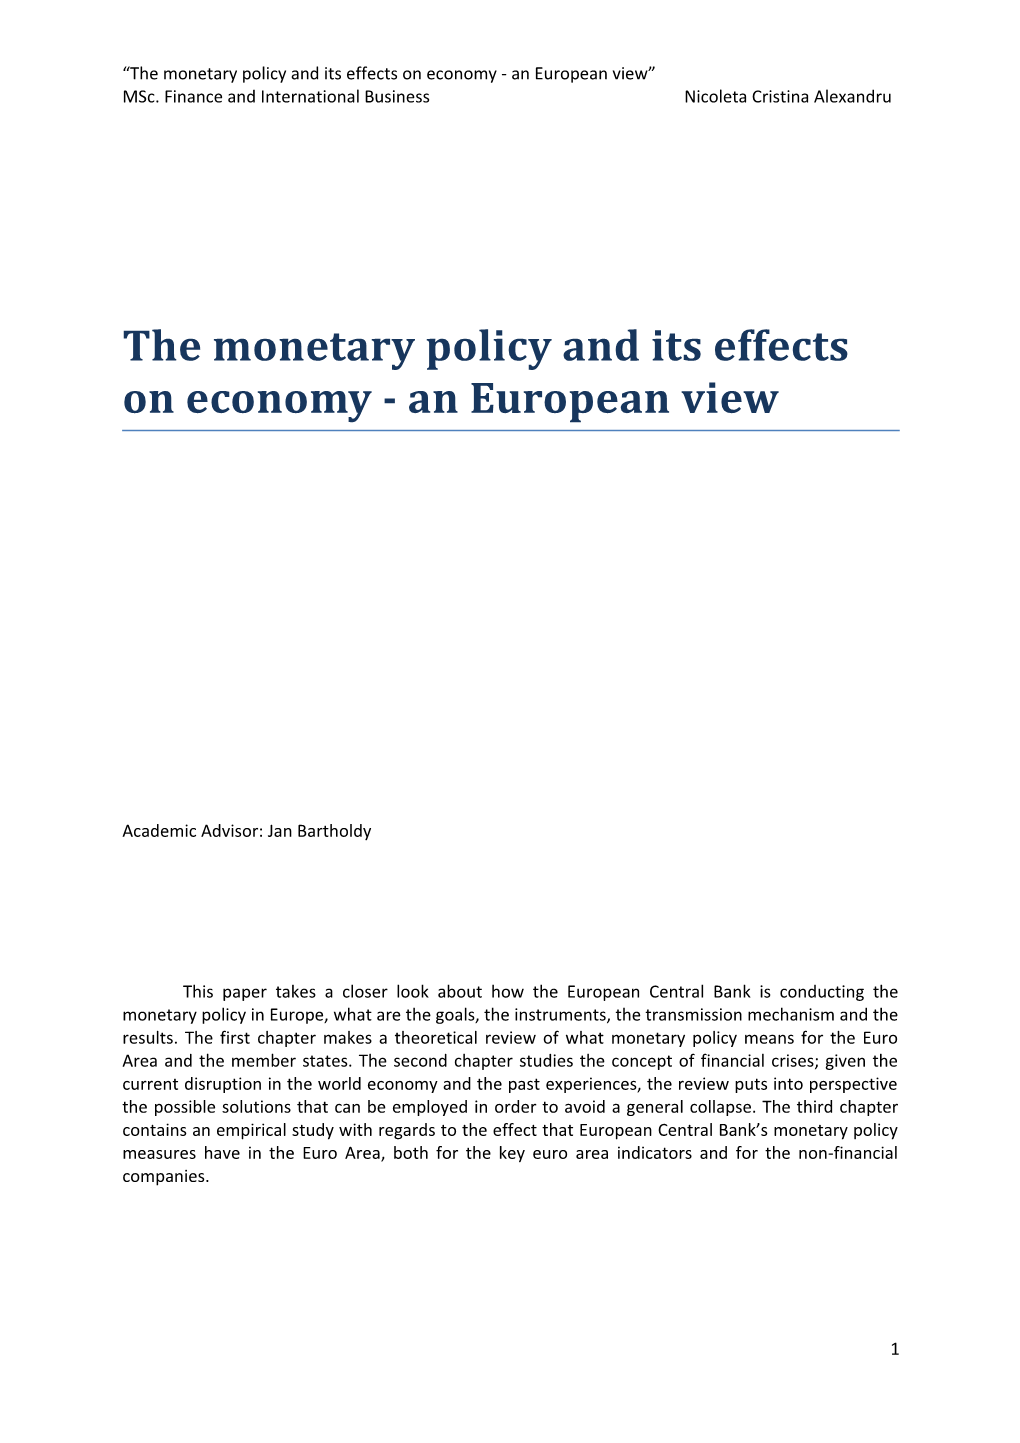 The Monetary Policy and Its Effects on Economy - an European View